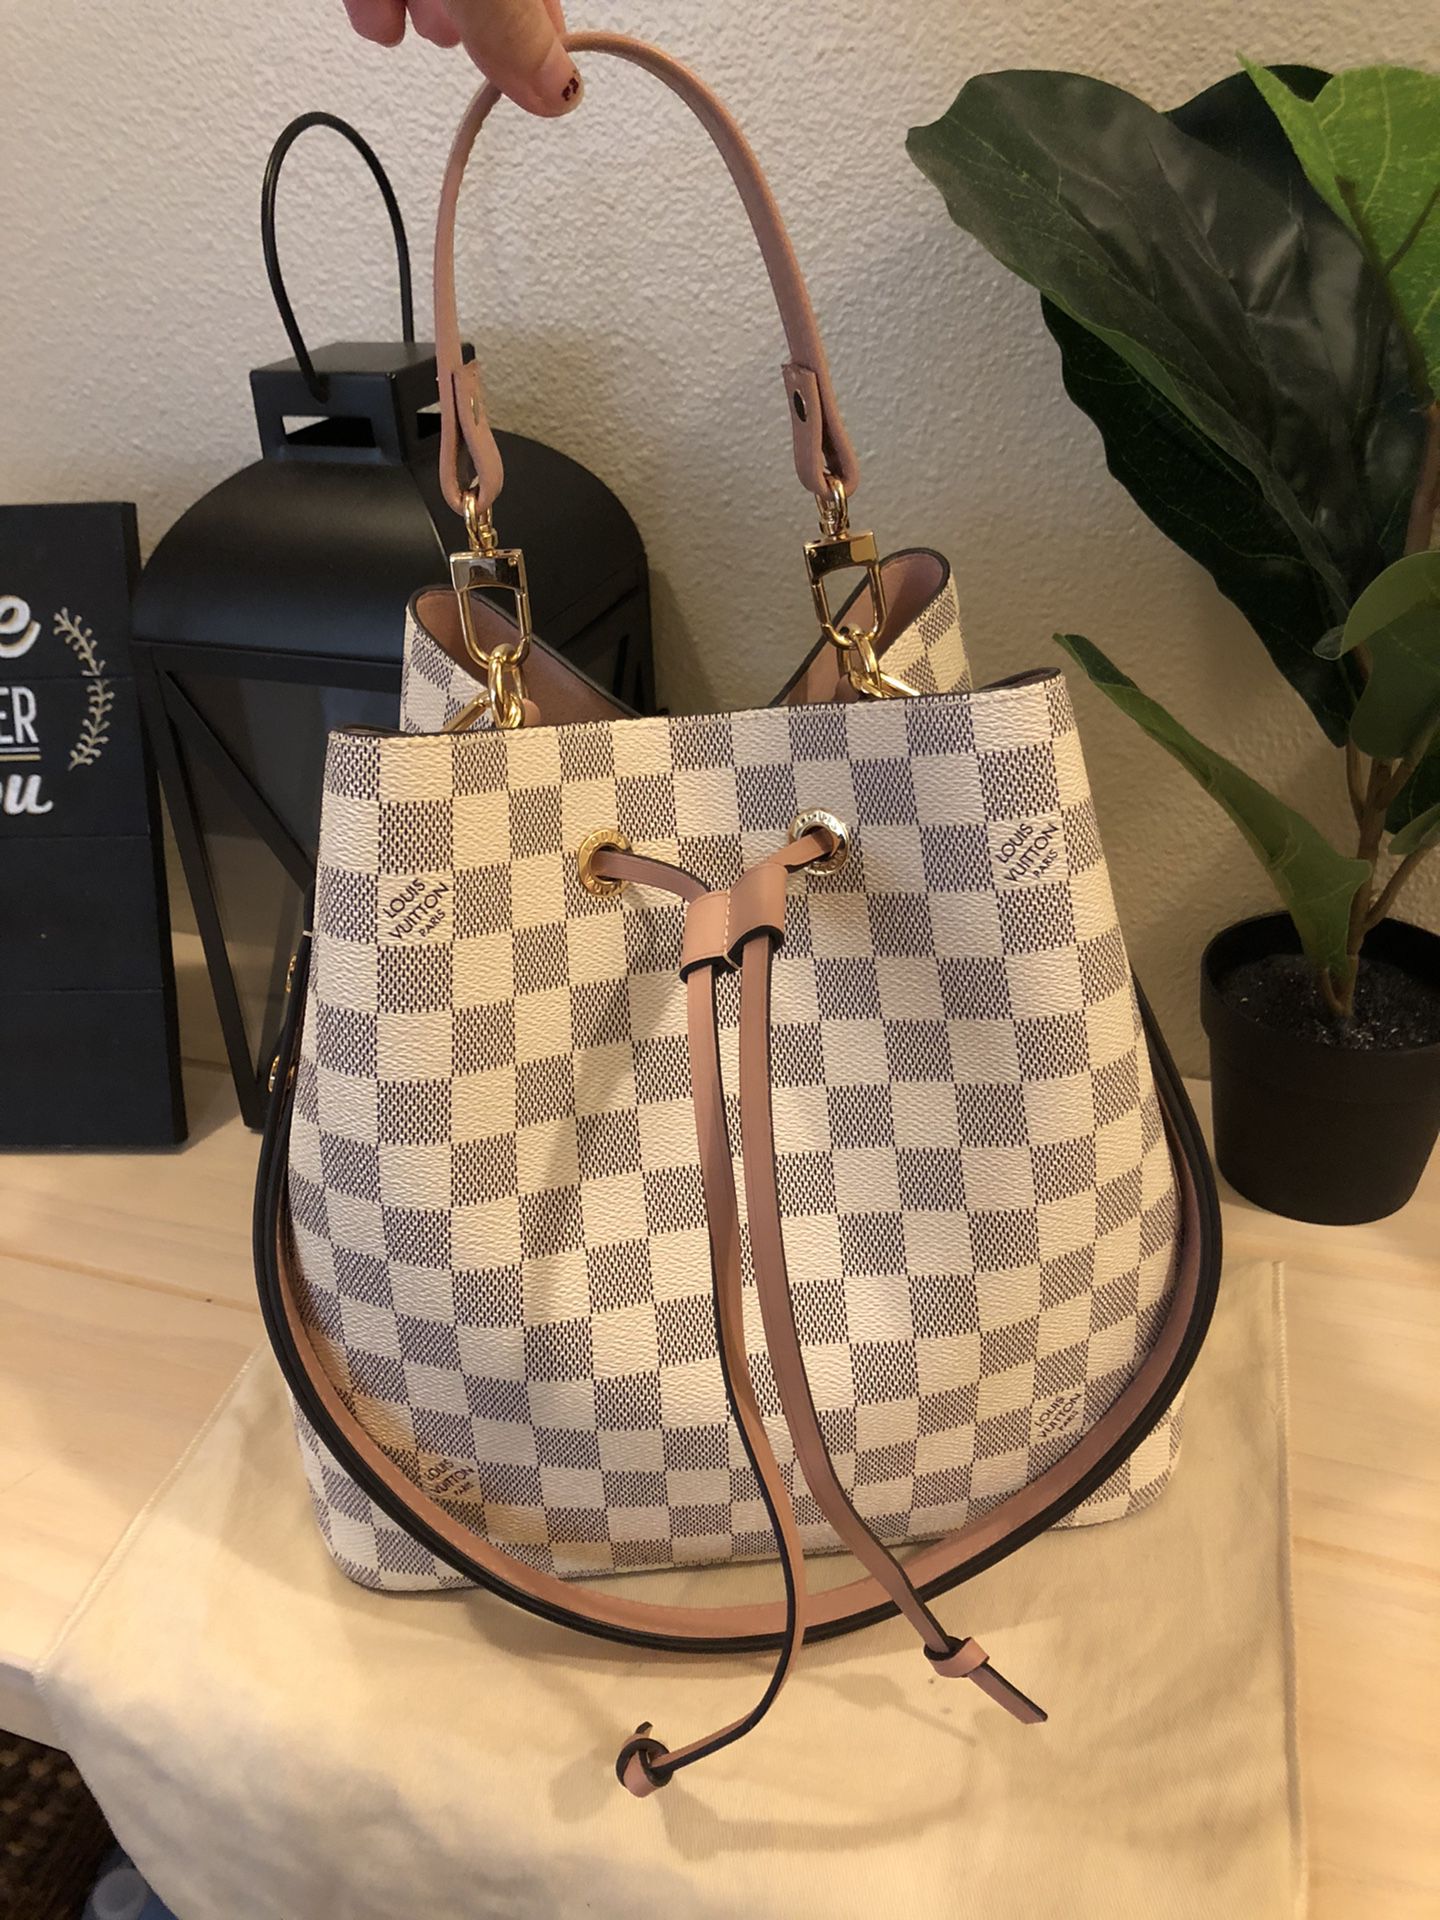 AuthentiLouis Vuitton neonoe MM in perfect condition like new.